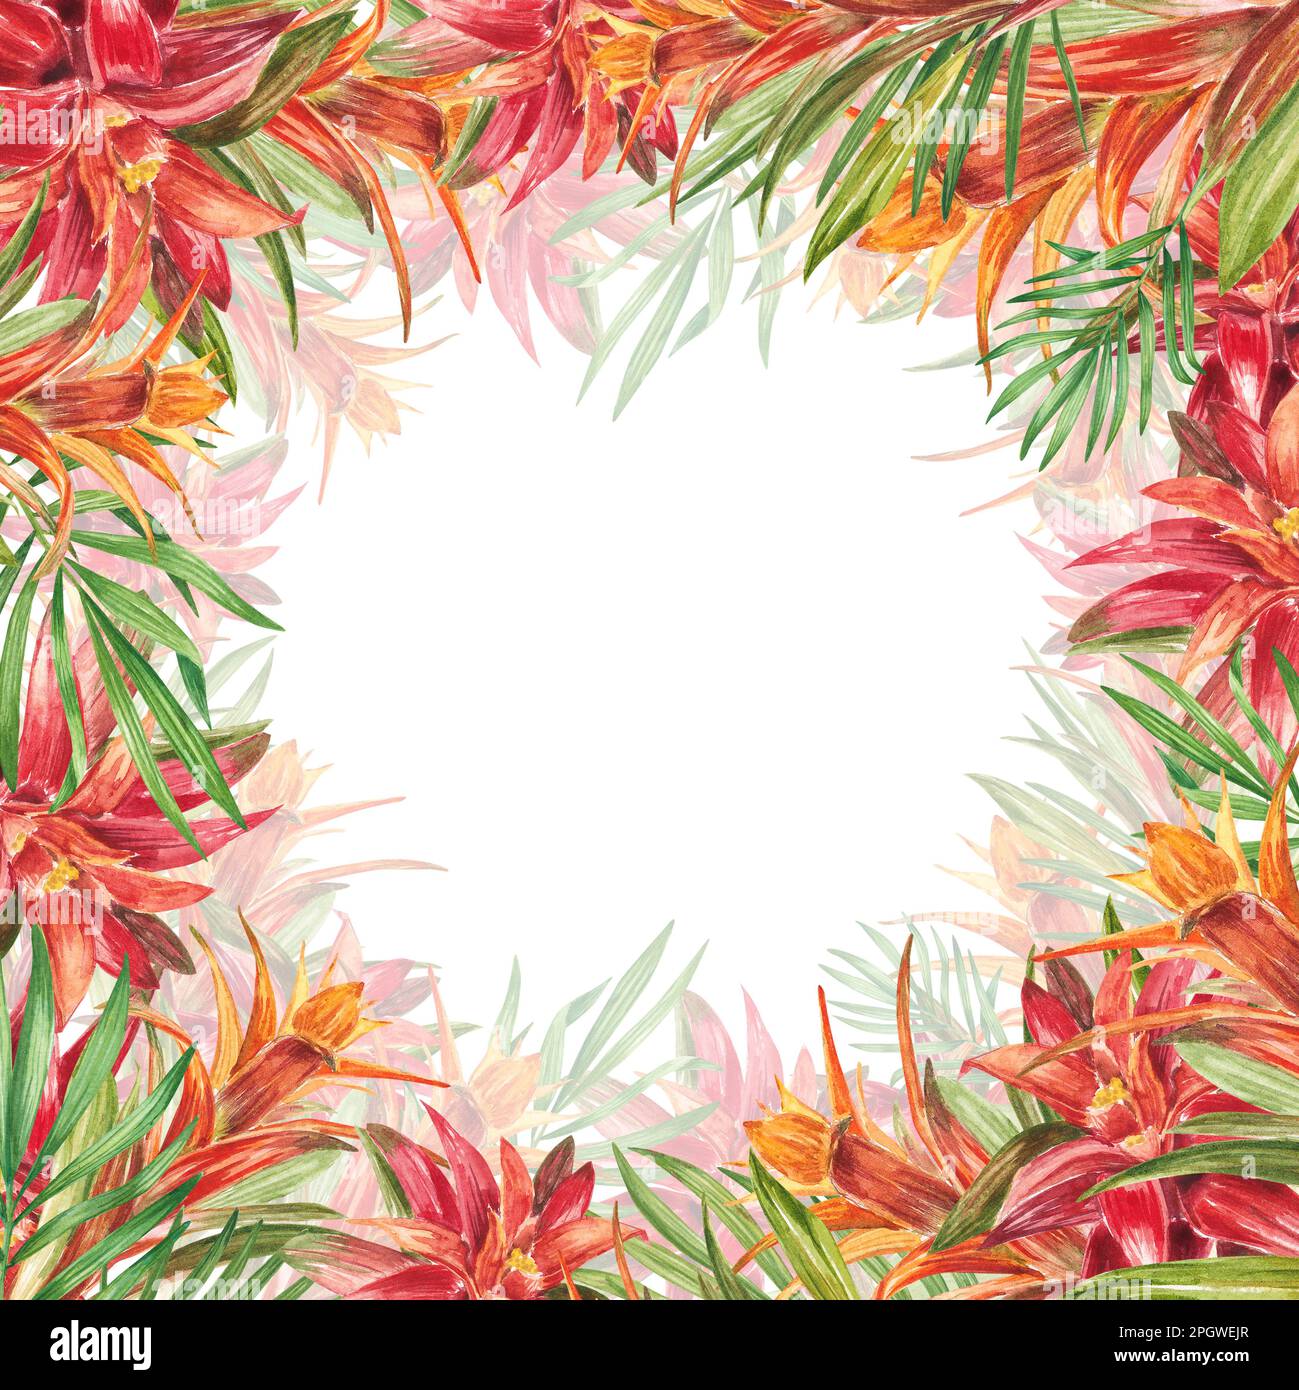 Tropical bromeliad plant with red and green leaves, Frame in watercolor. The illustration is highlighted on a white background. Spring or summer flowe Stock Photo